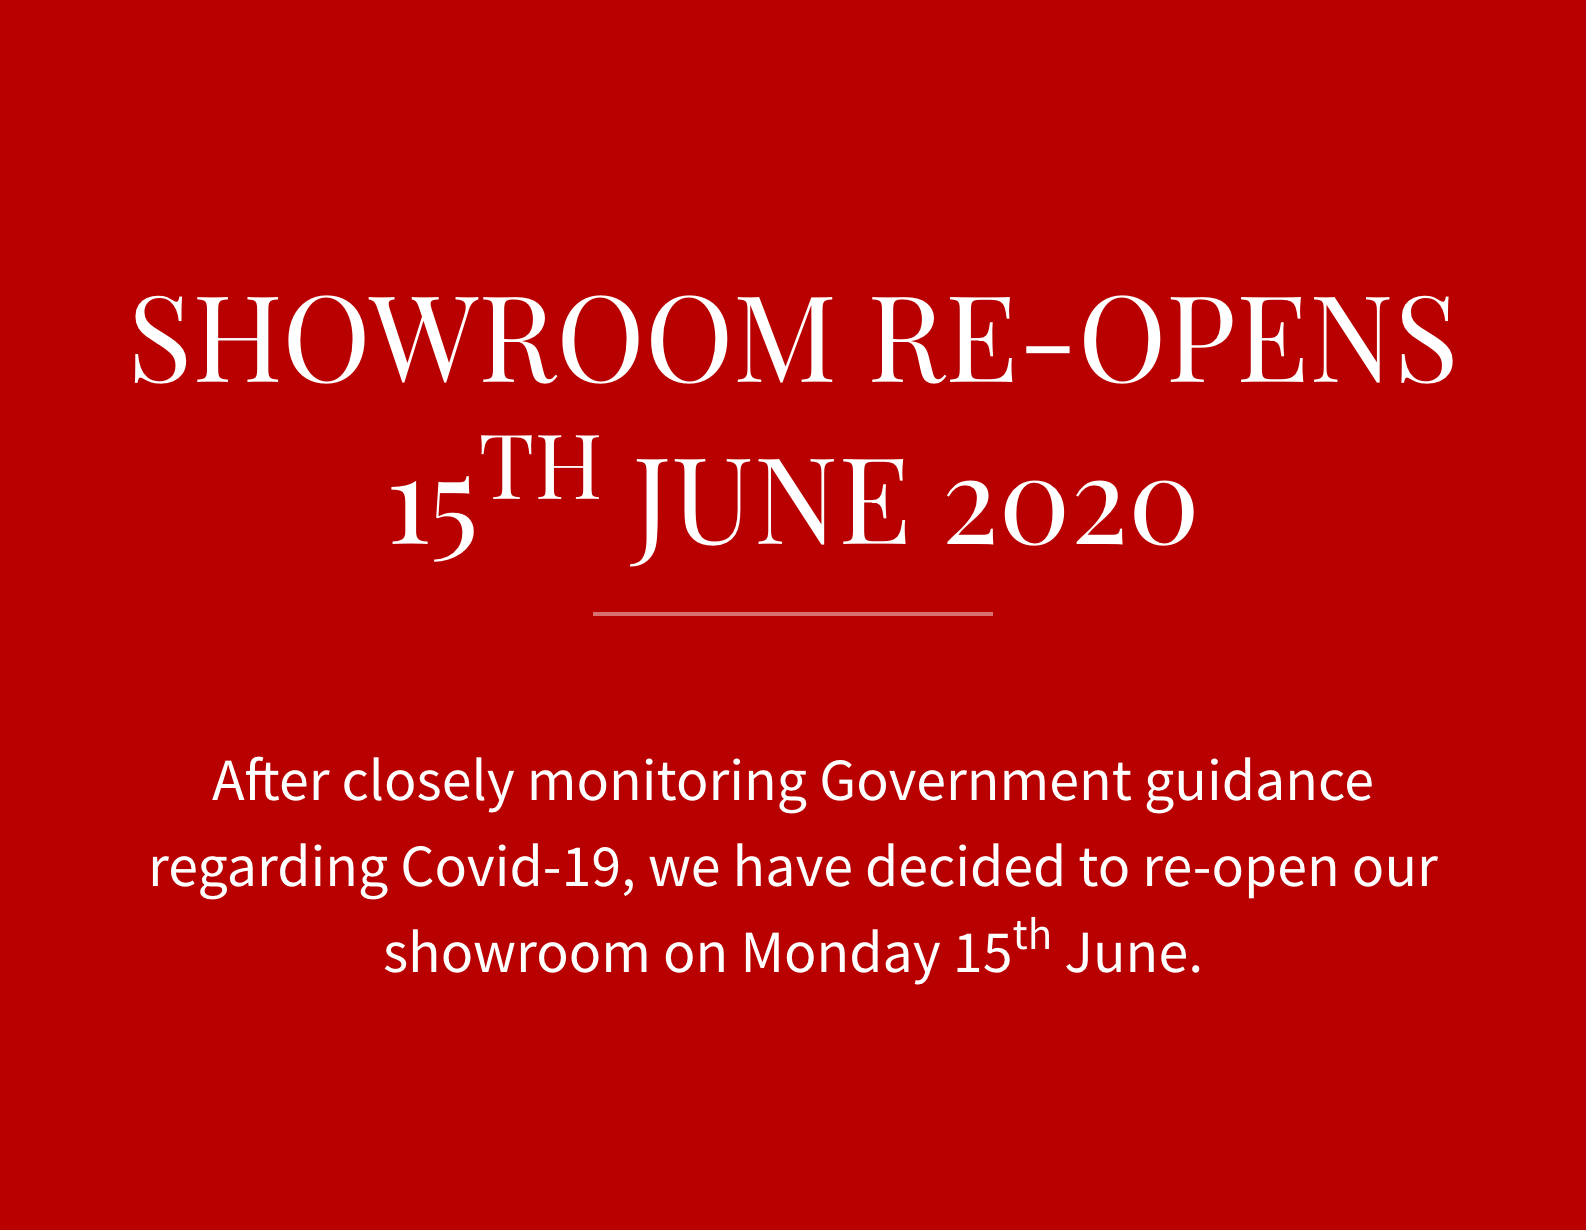 SHOWROOM RE-OPENS 15TH JUNE 2020. After closely monitoring Government guidance regarding Covid-19, we have decided to re-open our showroom on Monday 15th June.